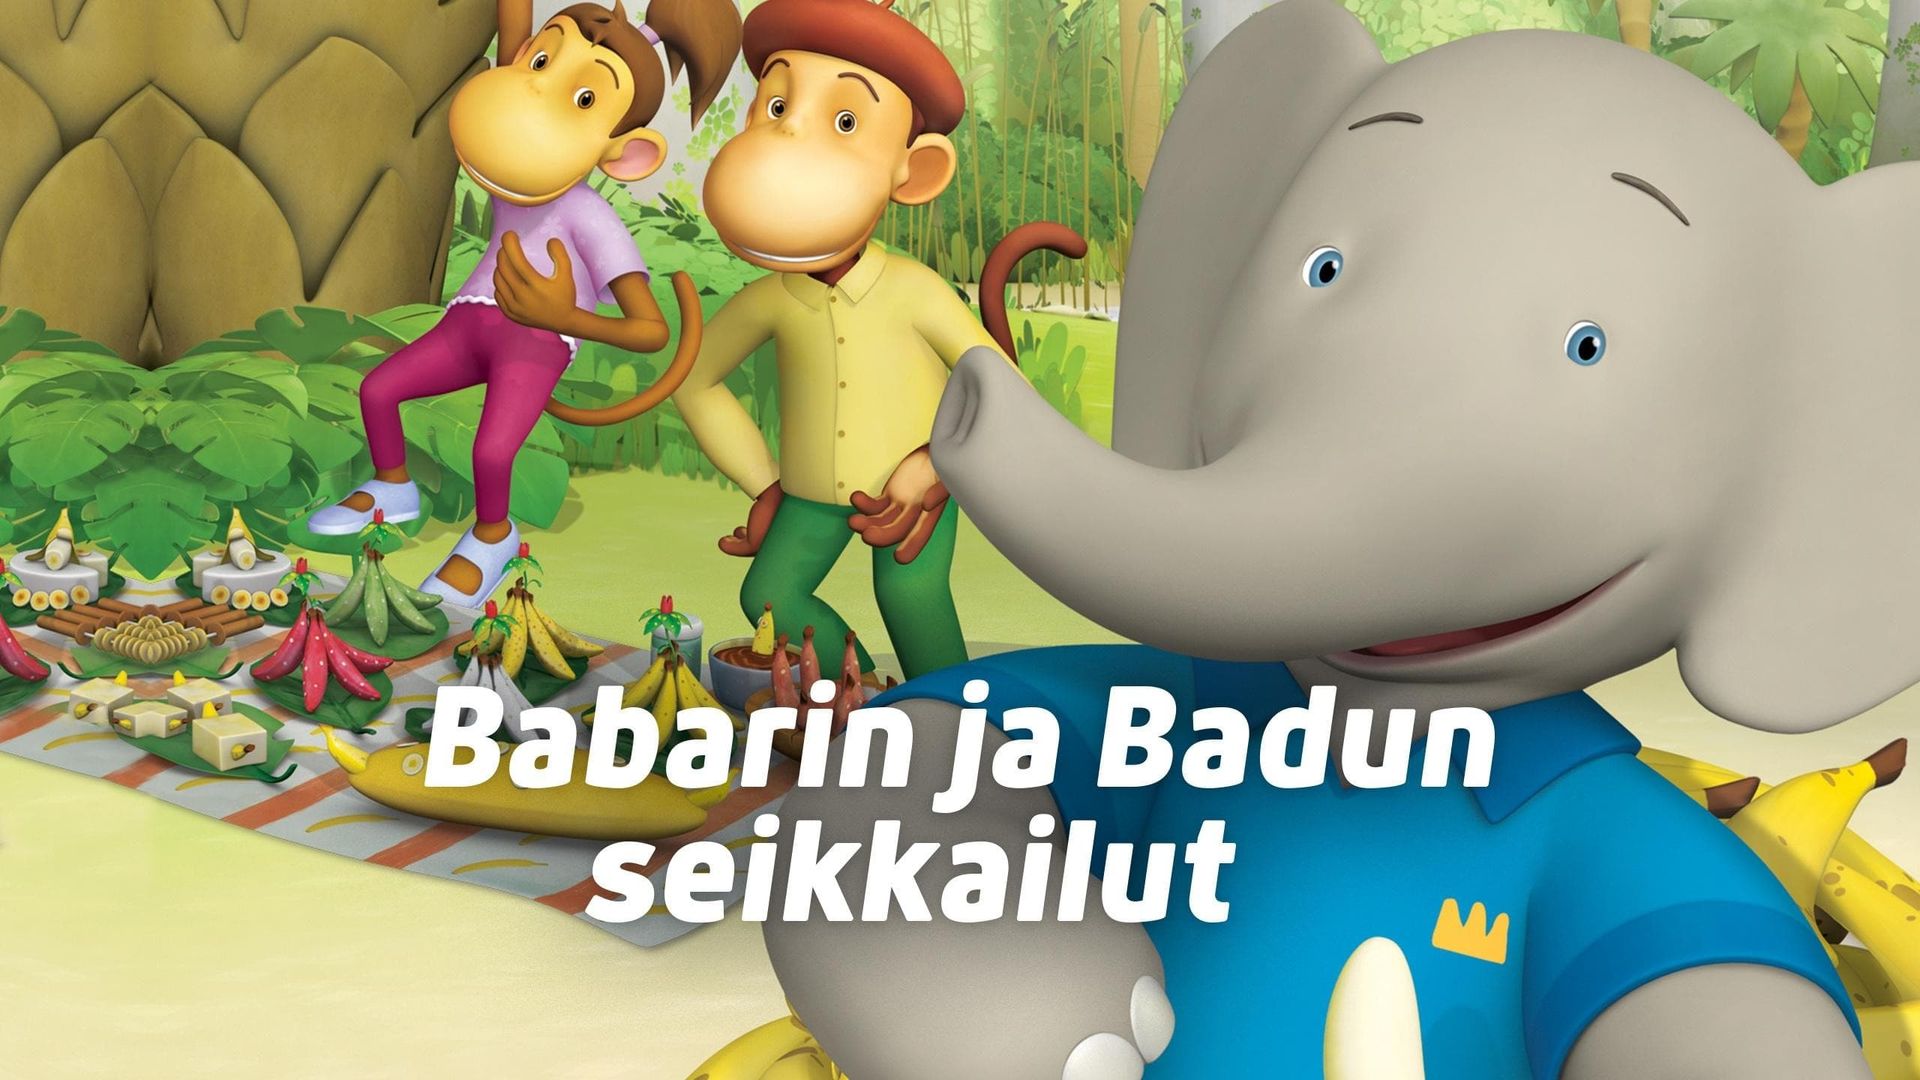 Babar and the Adventures of Badou background